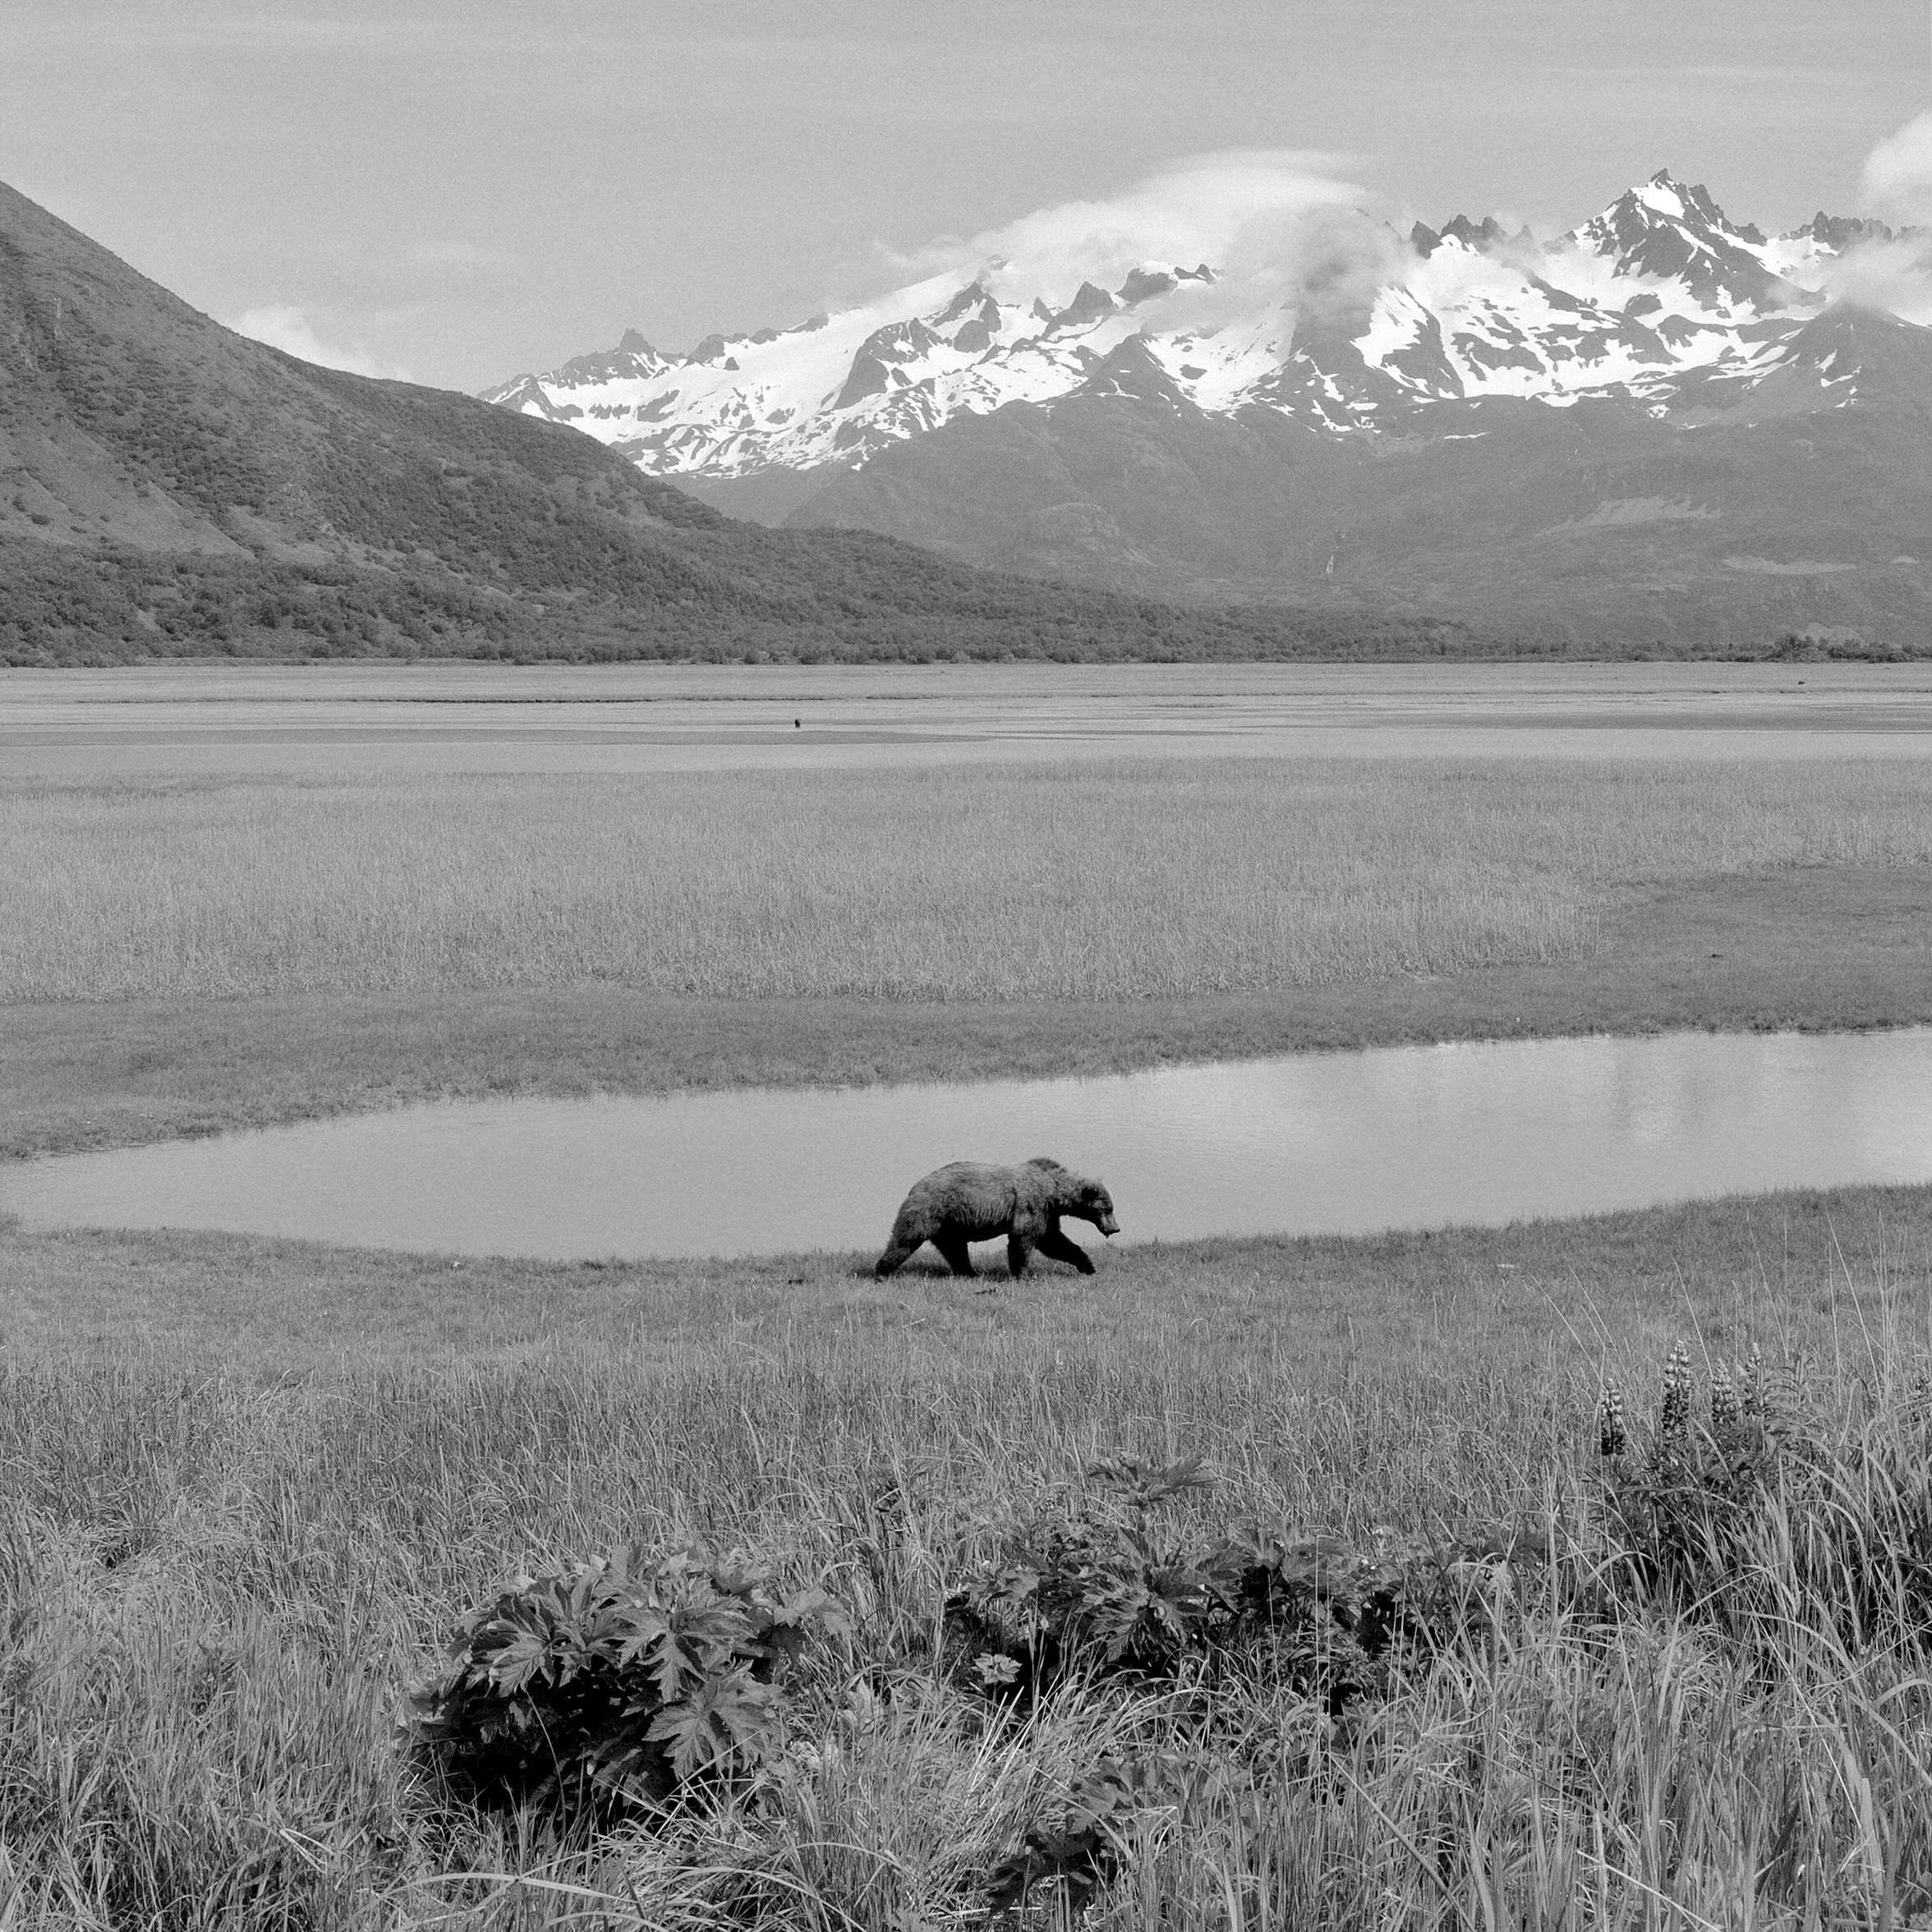 Thinking of Katmai, Alaska on this Earth Day. The most far out, untouched place I experienced during my time on the road.